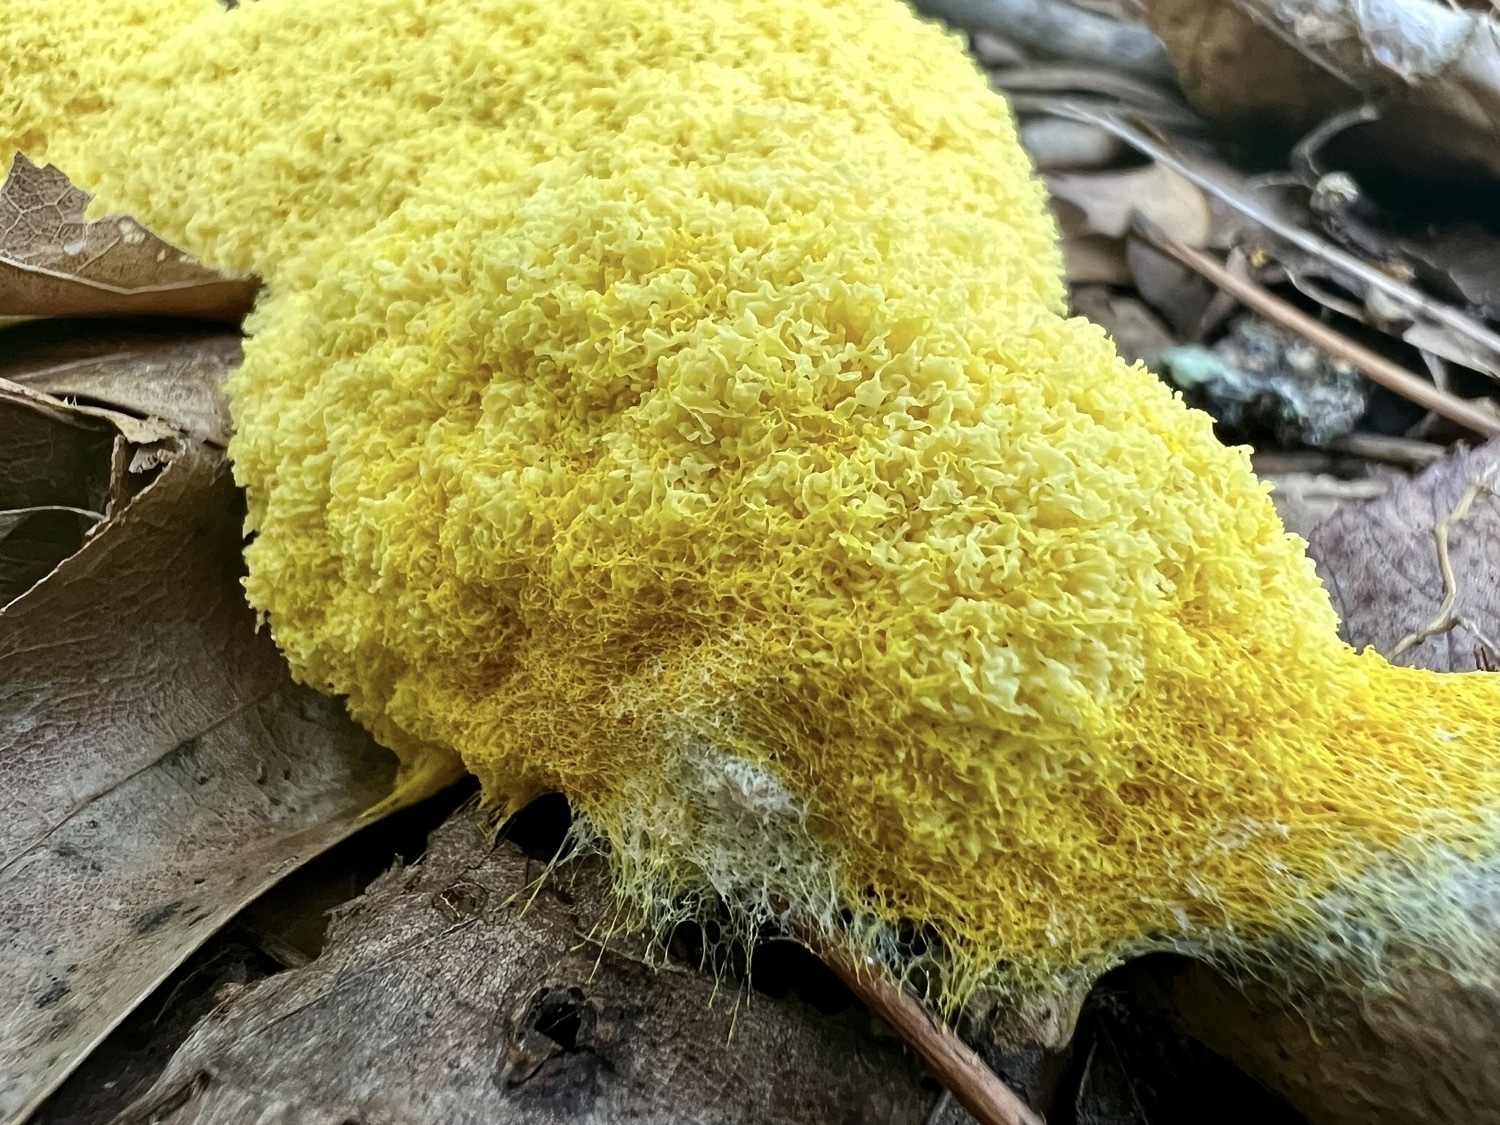 Yellow slime mold growing on fallen brown leaves. The yellow mold viewed close up is ruffled and where it is growing onto the leaves it creates a network of threads.